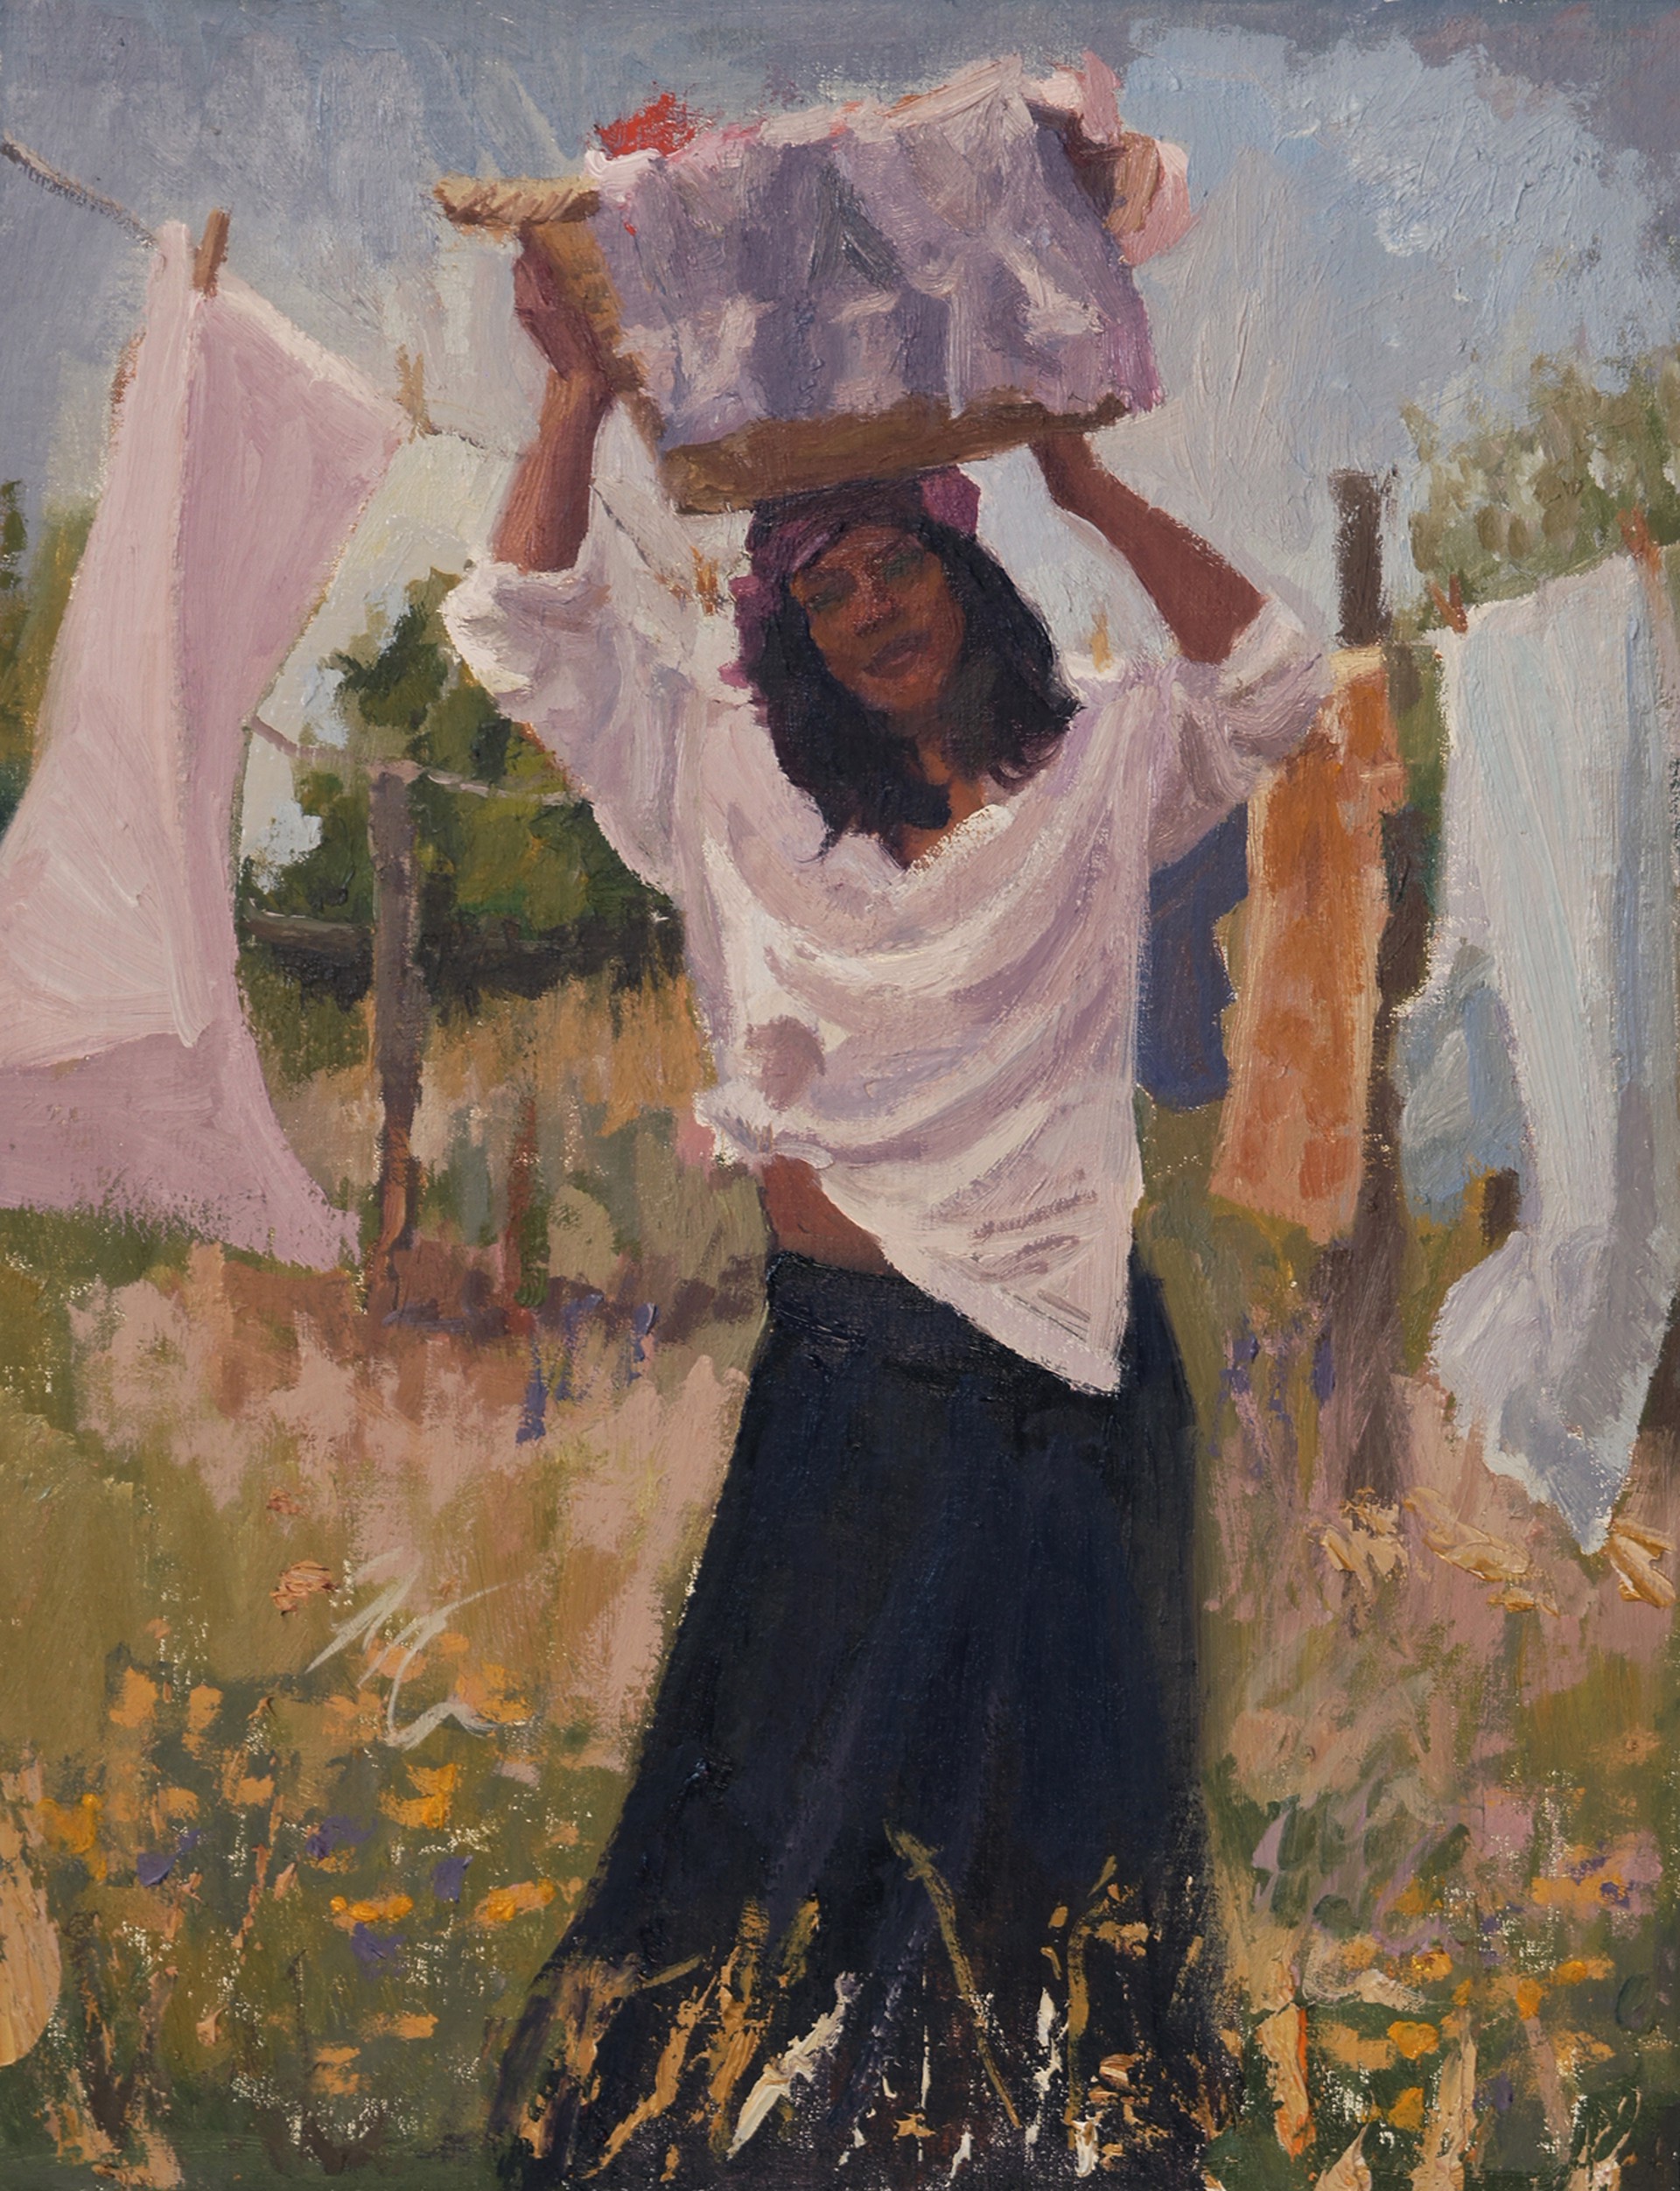 Another Tuesday Wash Day by C.M. Cooper